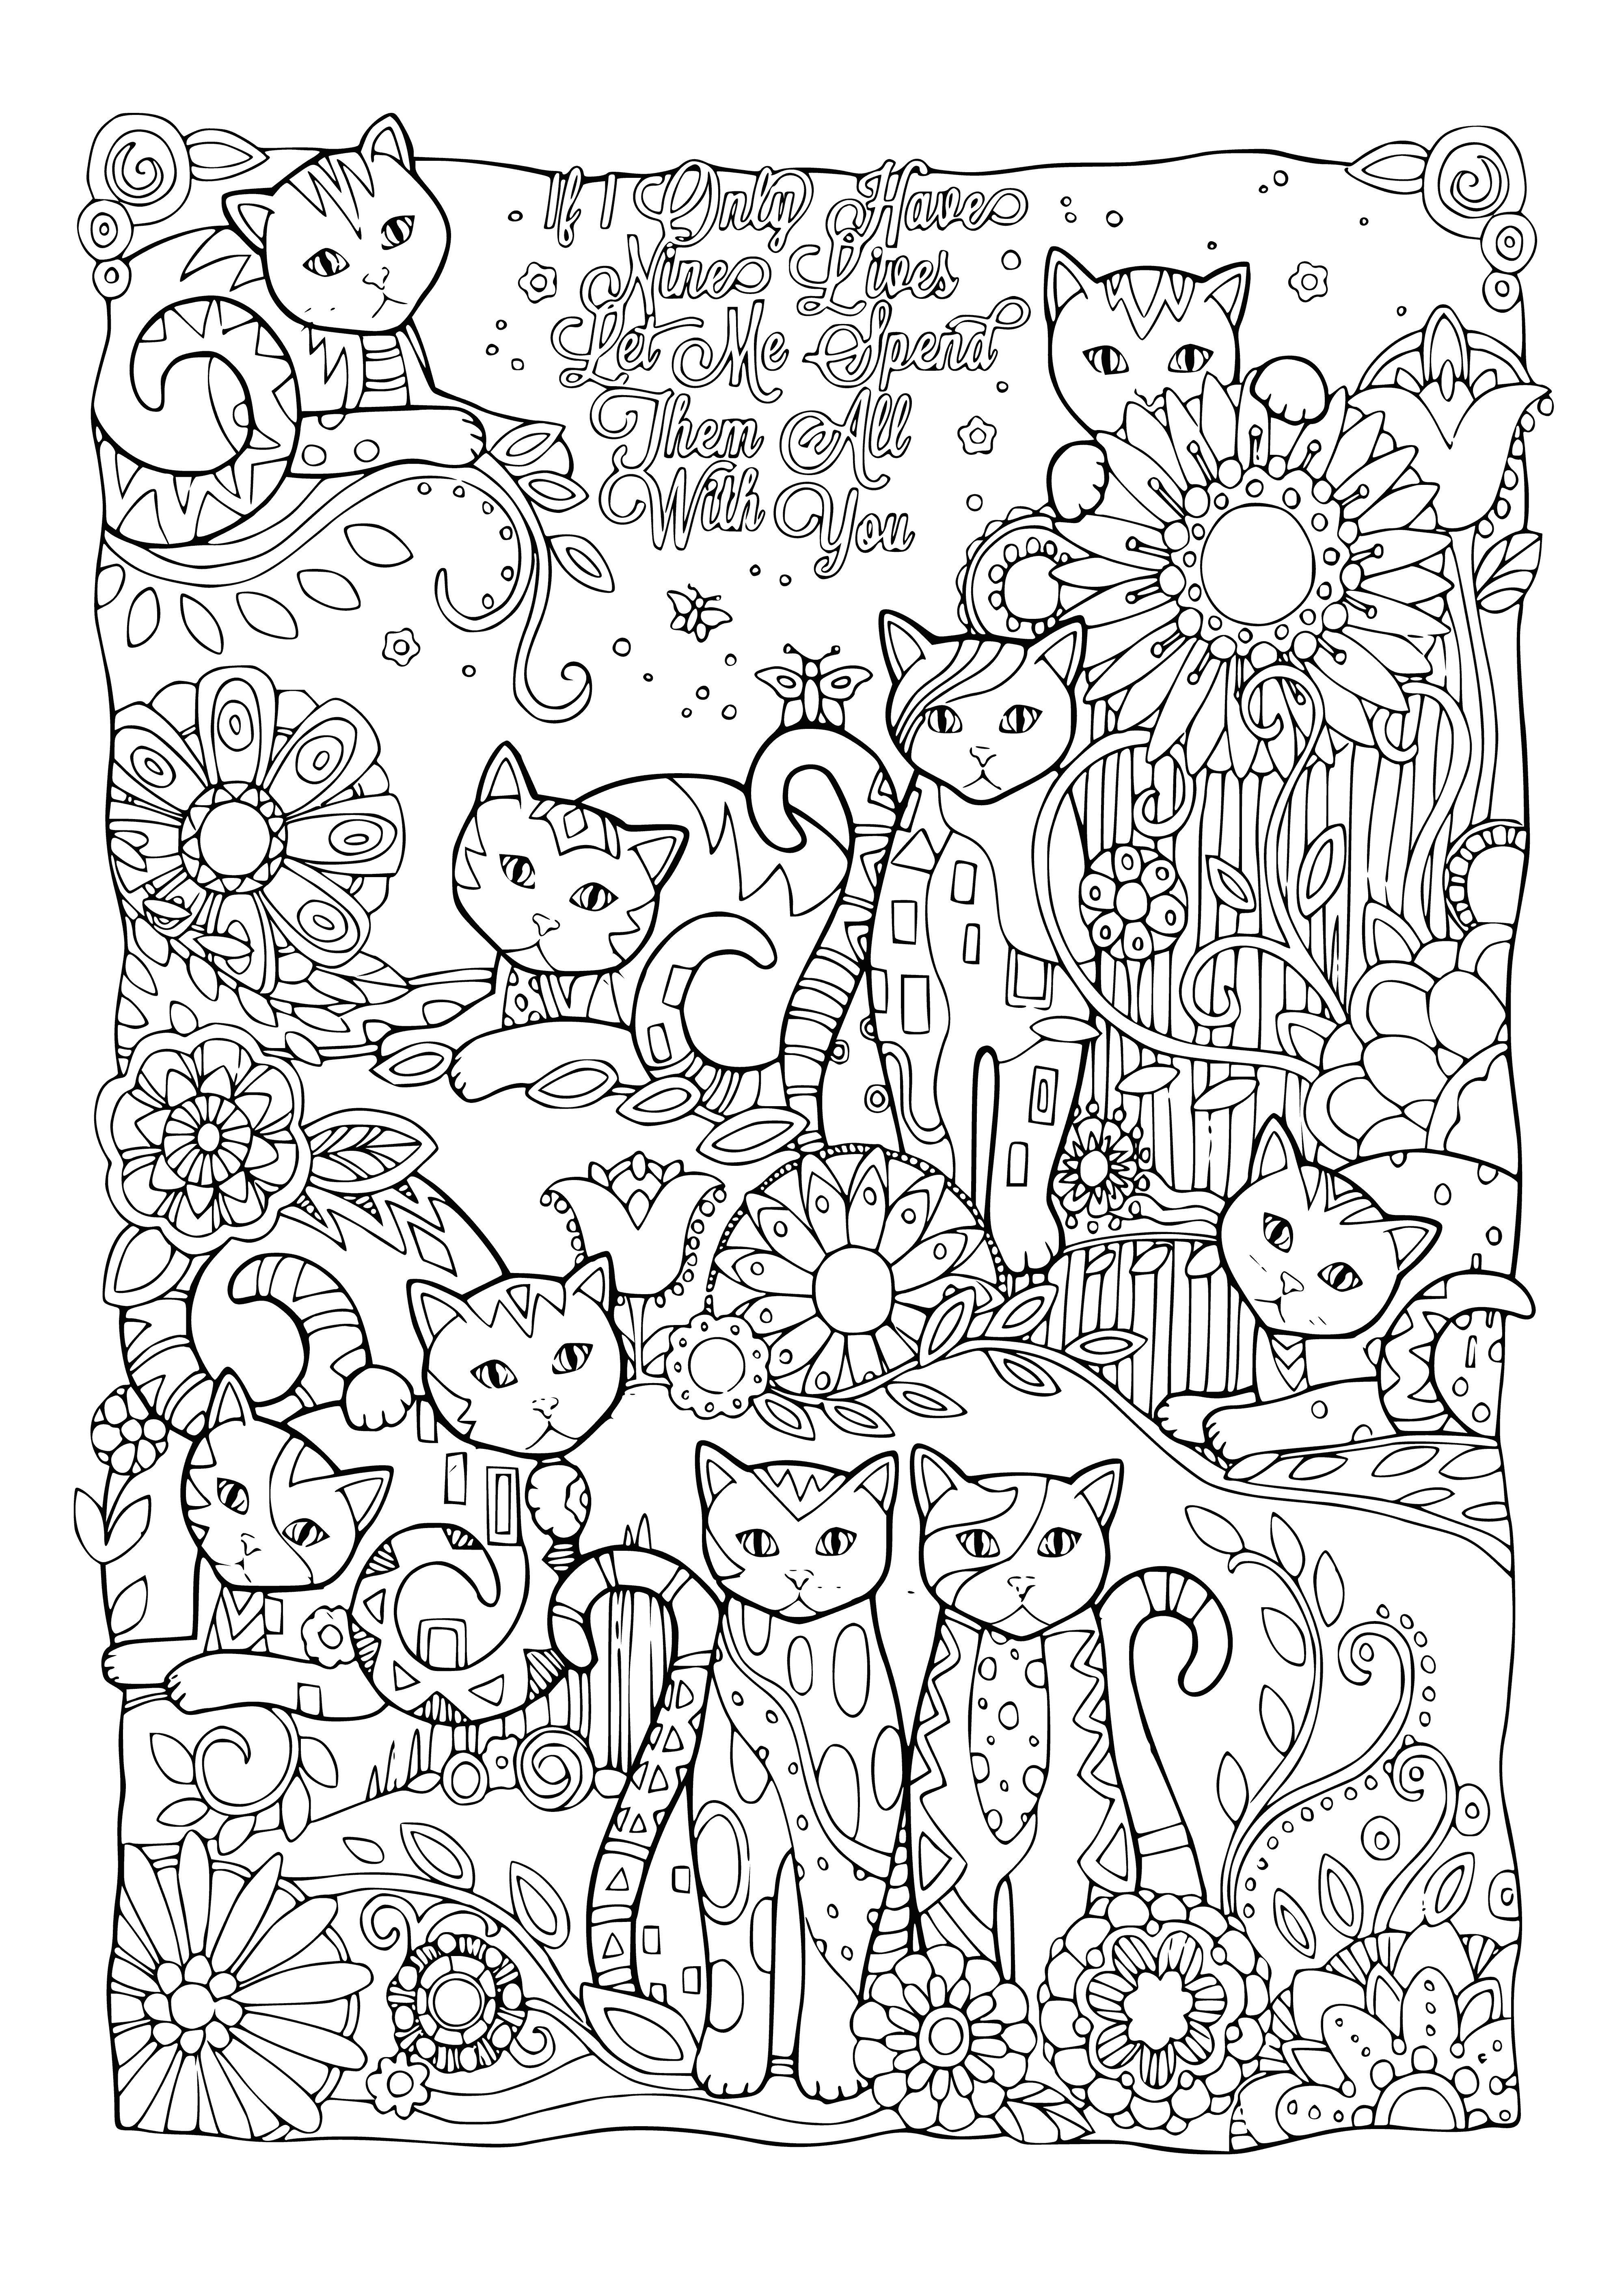 Nine lives coloring page